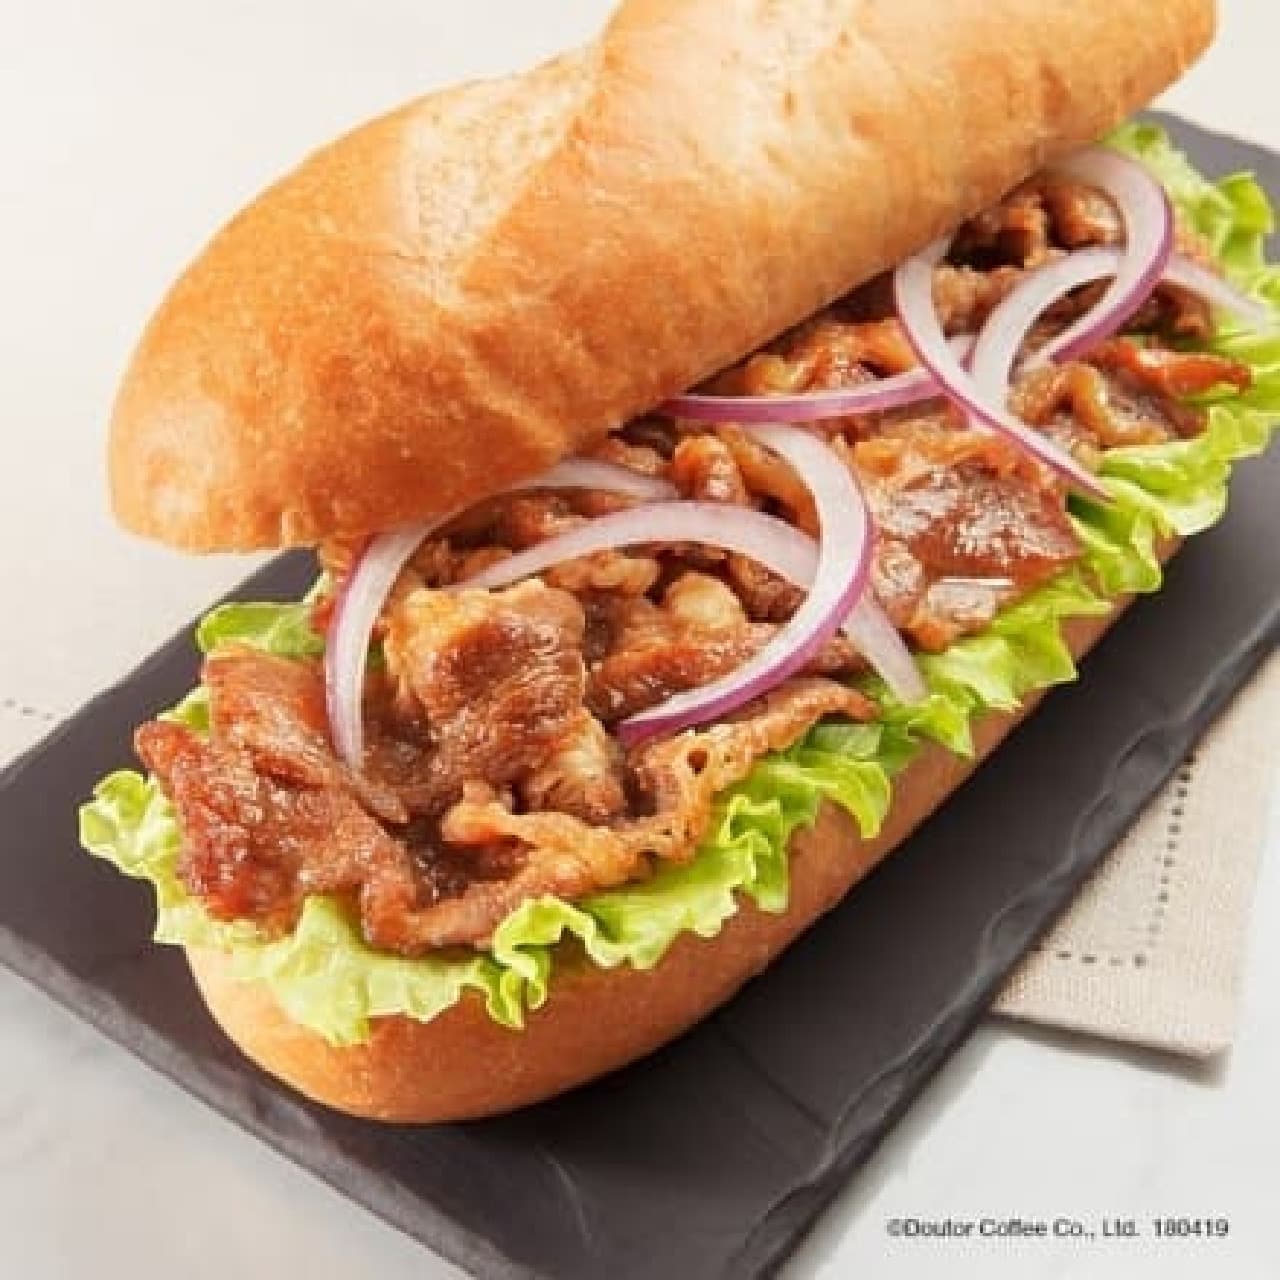 Doutor Coffee Shop "Milan Sand Domestic Grilled Beef"